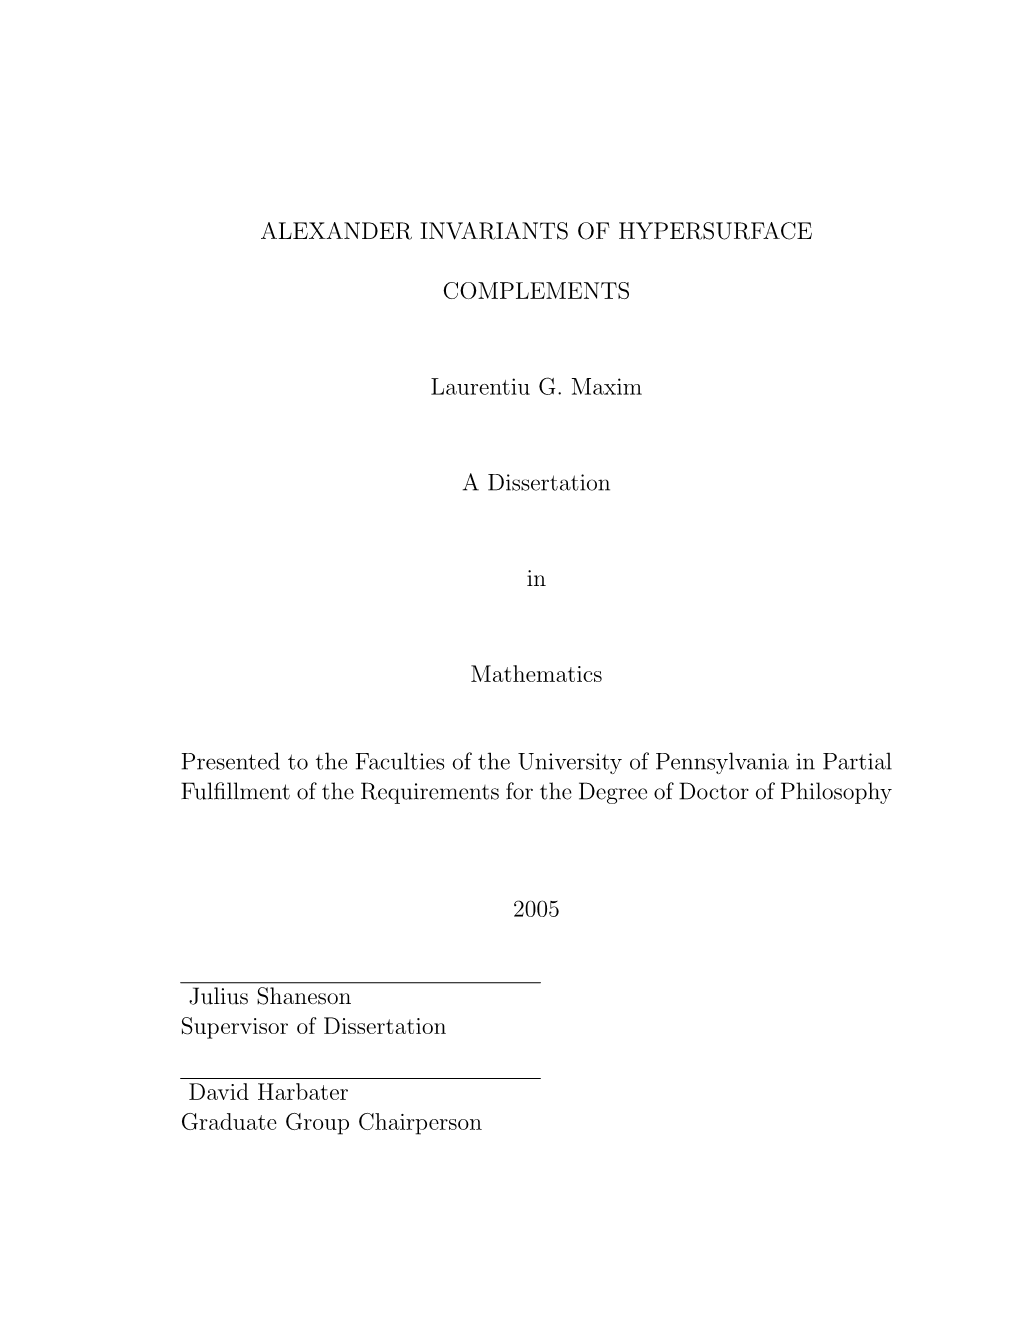 Alexander Invariants of Hypersurface Complements